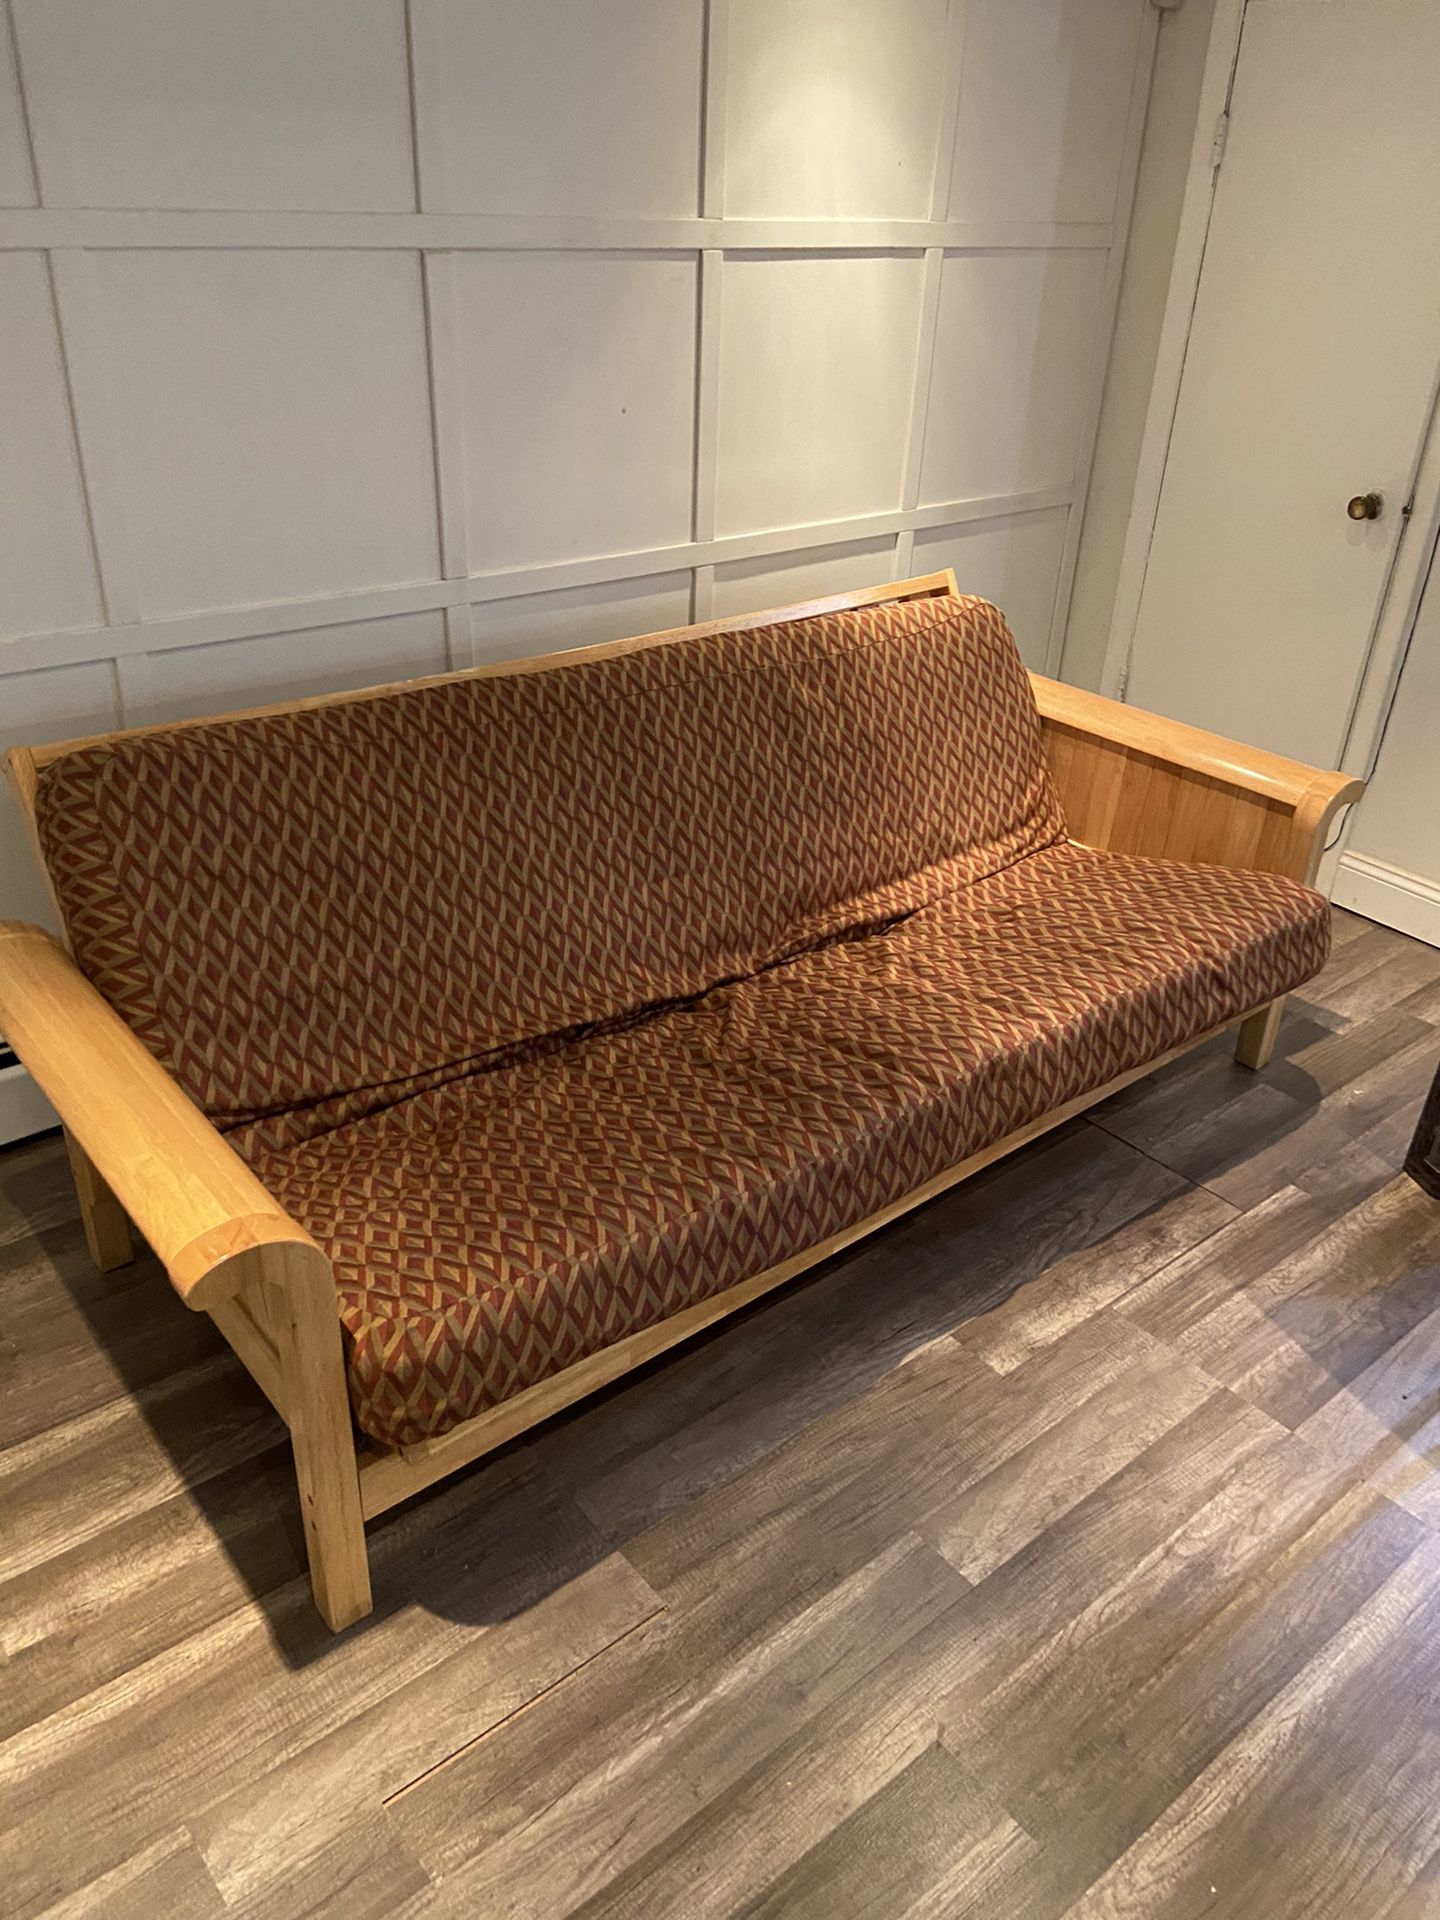 Used wooden futon with fabric cover